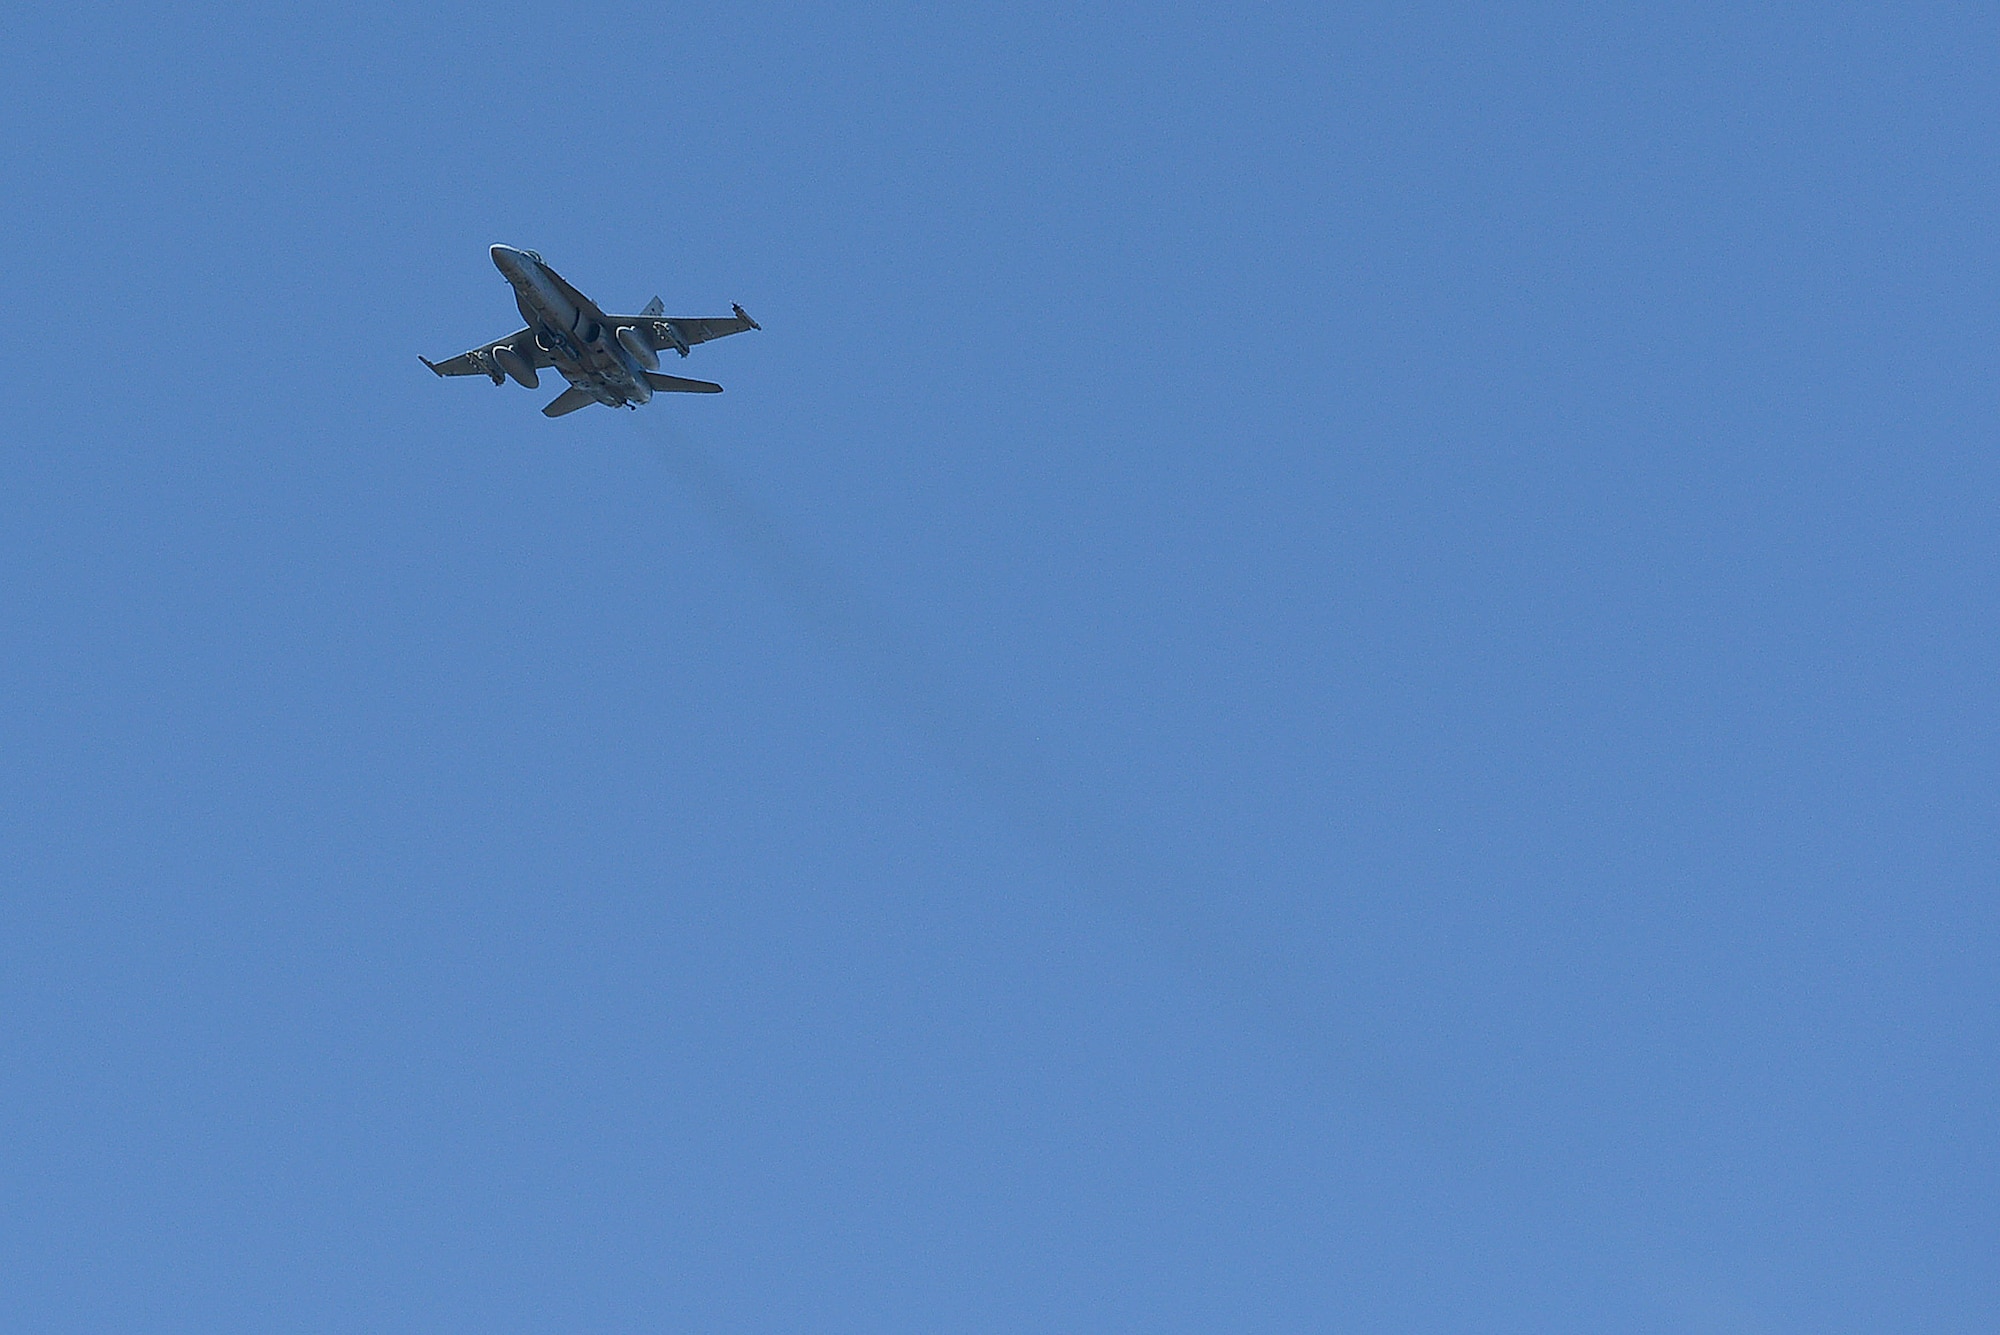 An F/A-18 Super Hornet assigned to Marine Corps Air Station Beaufort, 2nd Marine Air Wing, Marine Air Group 31, Marine Fighter Attack Squadron 122, flies over Poinsett Electronic Combat Range for training, Sumter, S.C., Nov, 7, 2014. There was a total of 1,070 bombs dropped on Poinsett in 2013. (U.S. Air Force photo by Airman 1st Class Diana M. Cossaboom/Released)